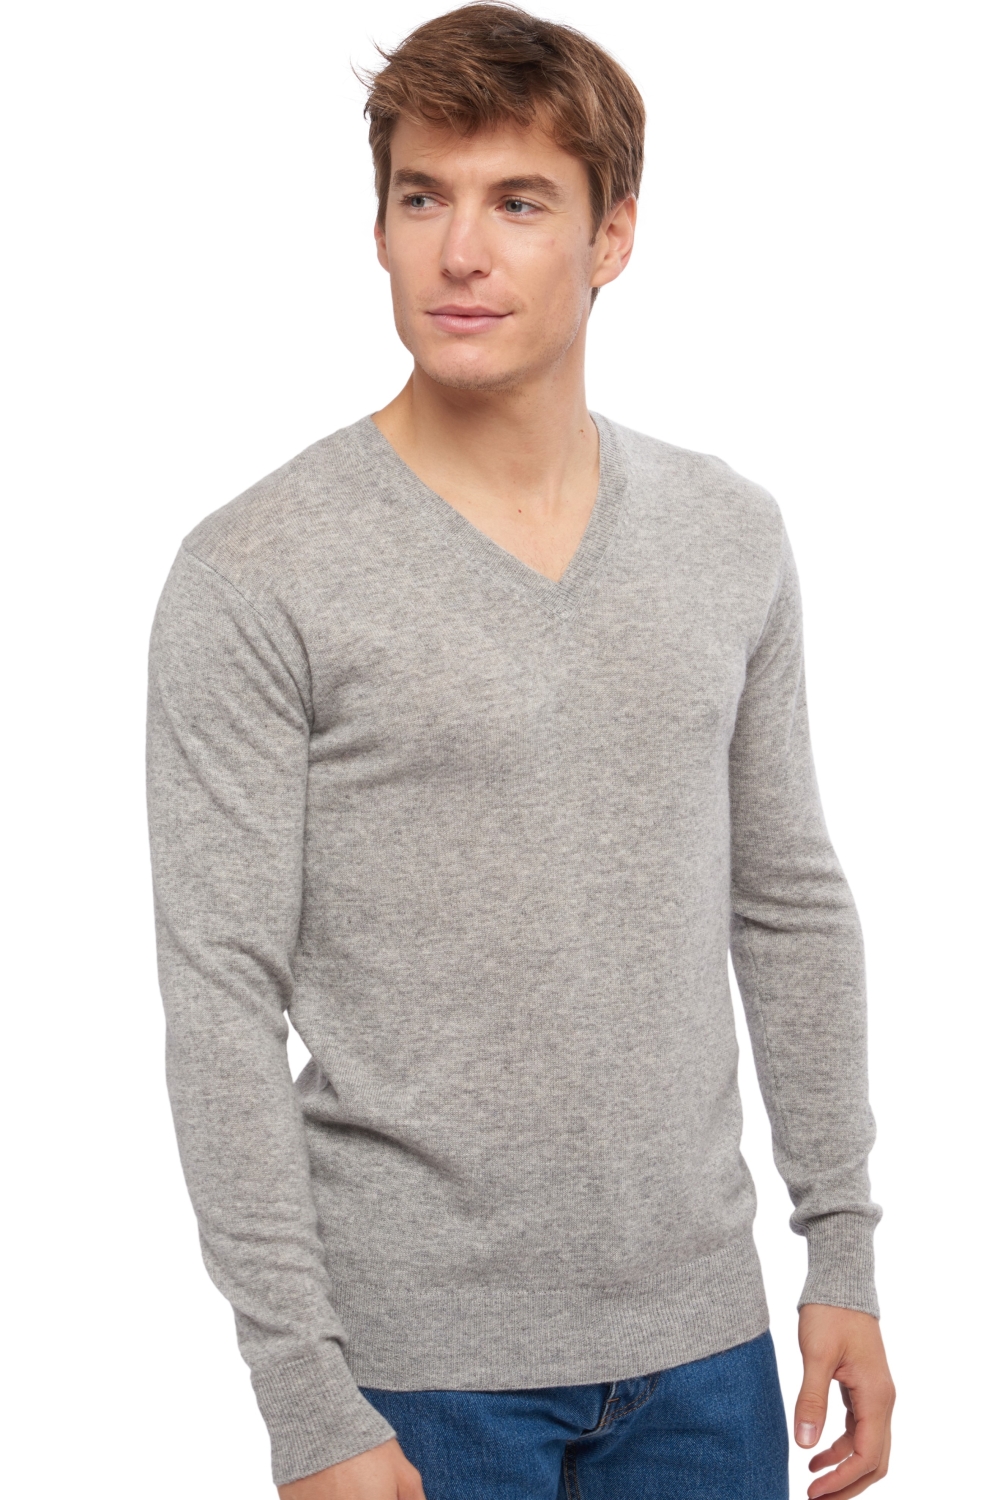 Cashmere men basic sweaters at low prices tor first fog grey l